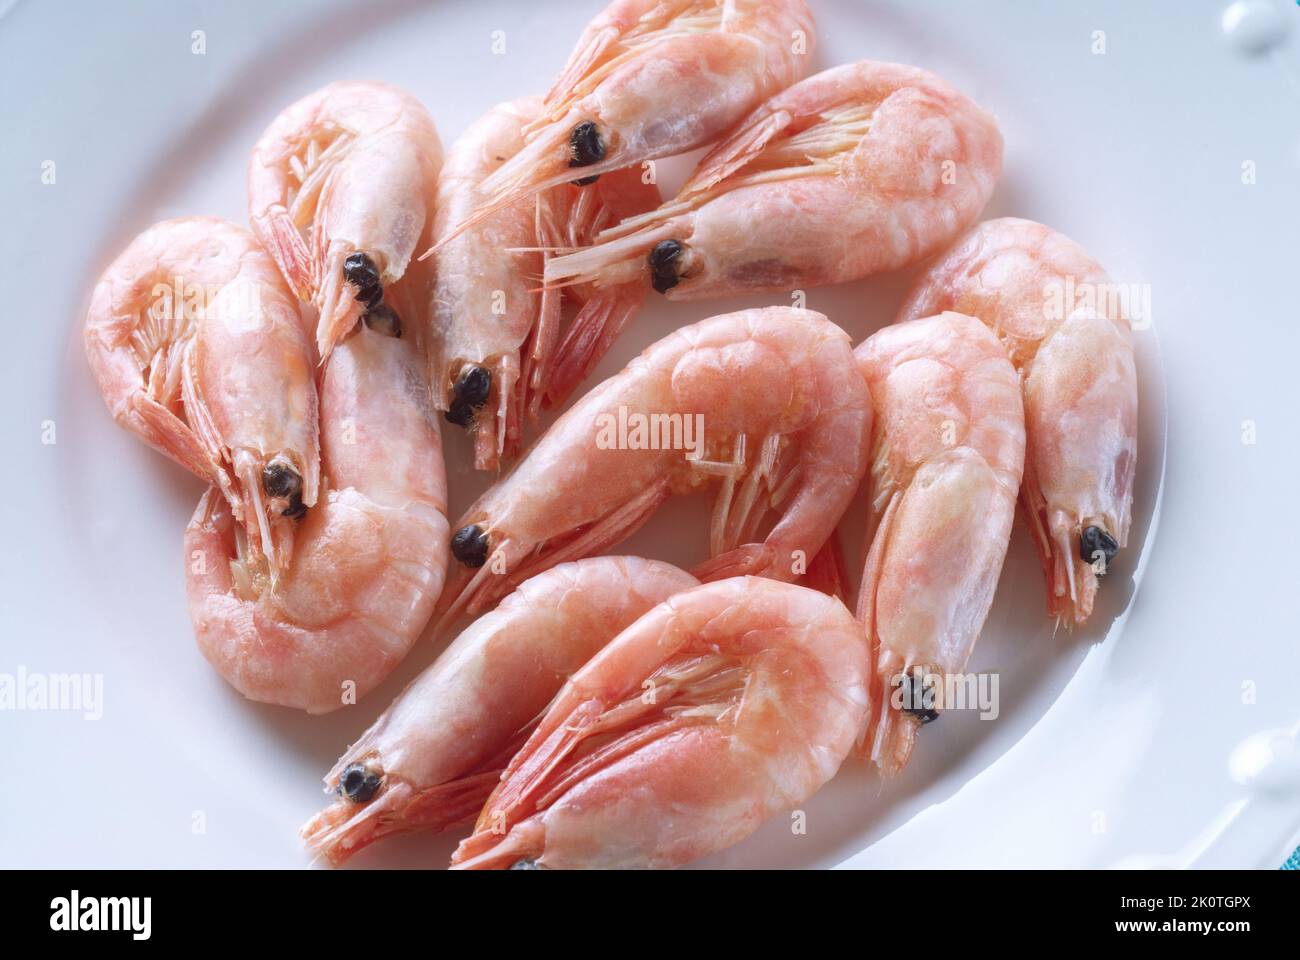 Cooked Shrimps on a plate from above close up Stock Photo